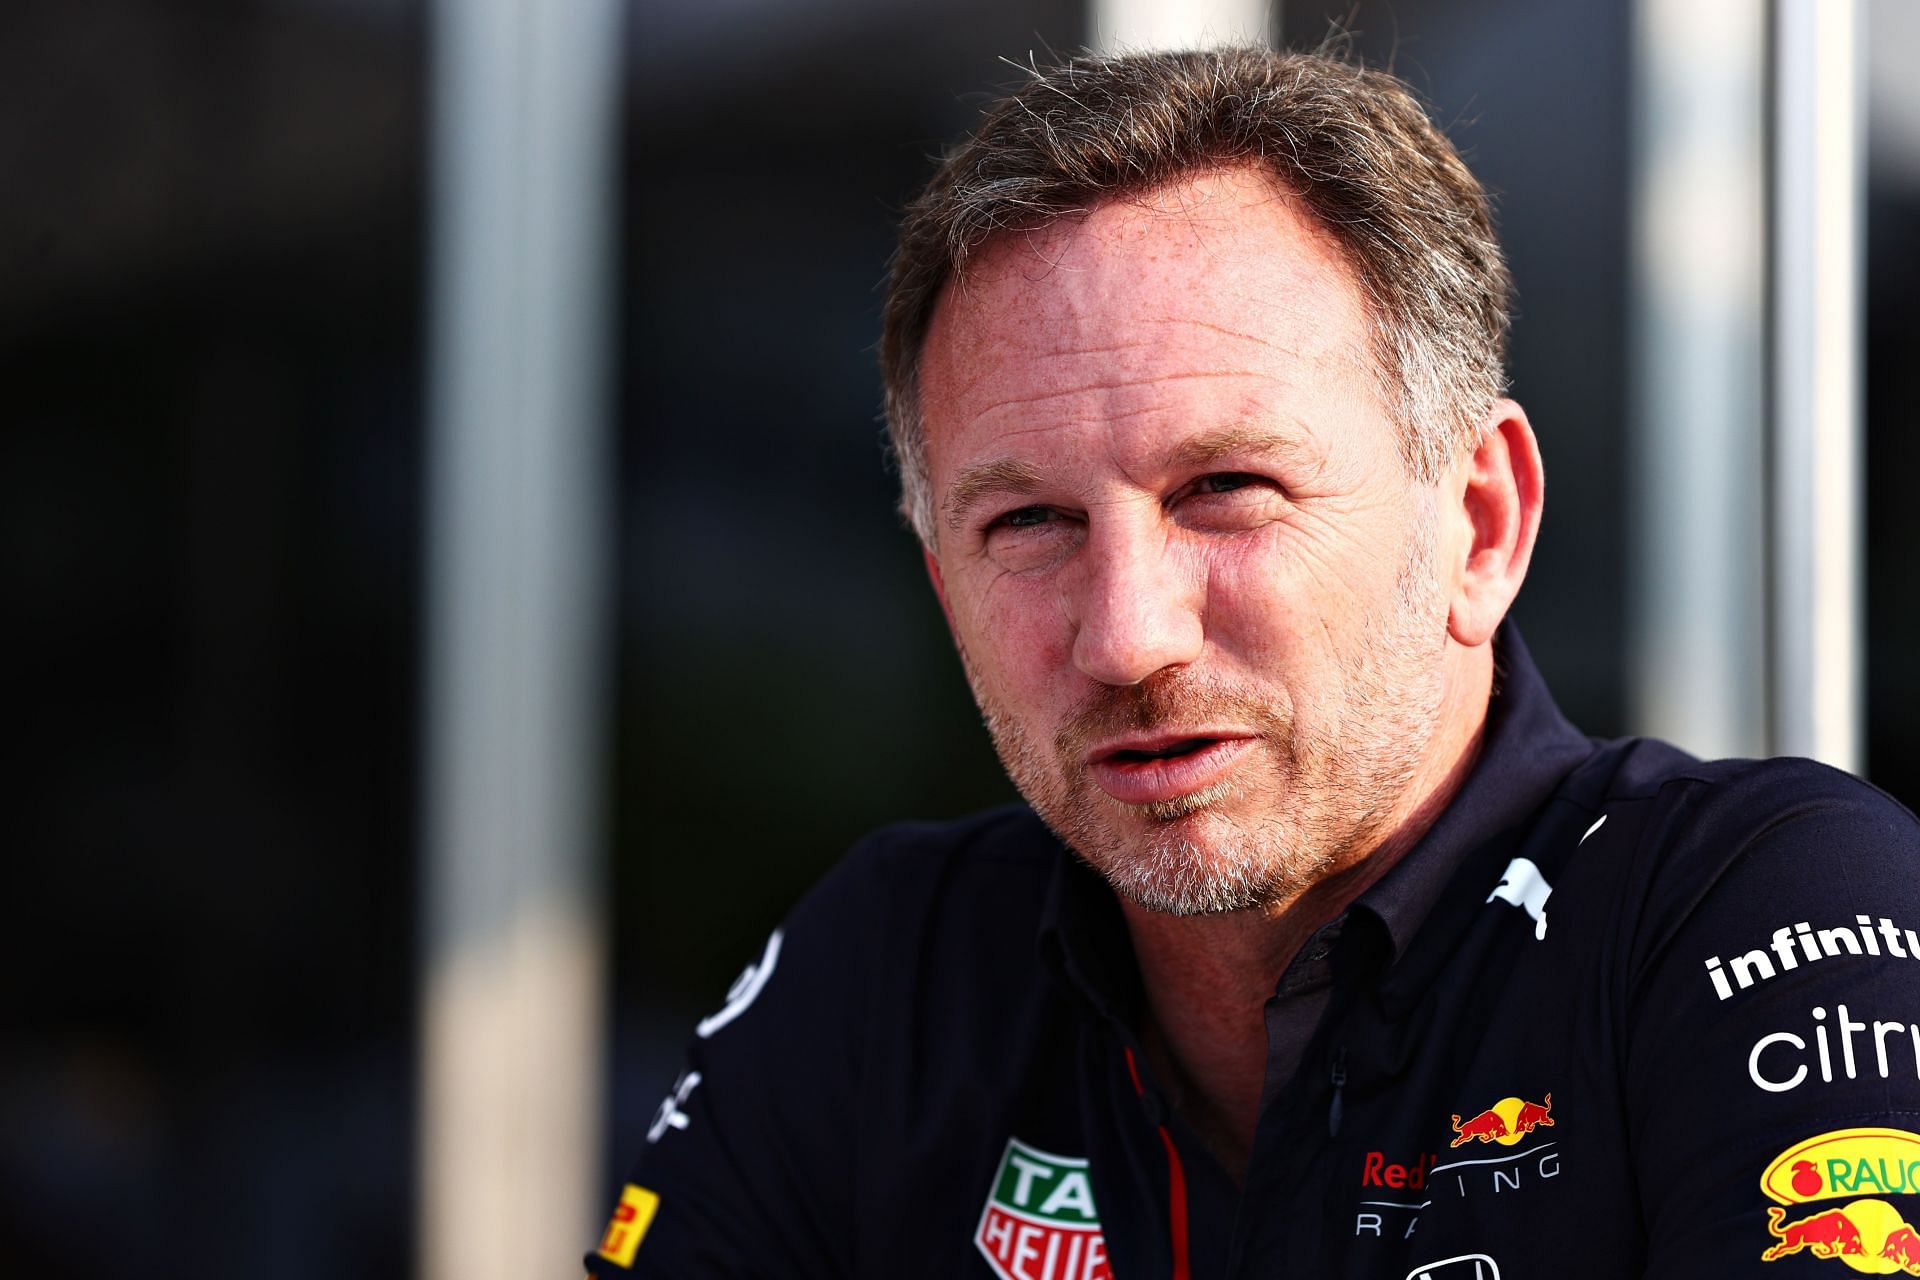 Christian Horner has rubbished Toto Wolff&rsquo;s claims about Red Bull using &lsquo;flexi-floors&rsquo; to gain an advantage.